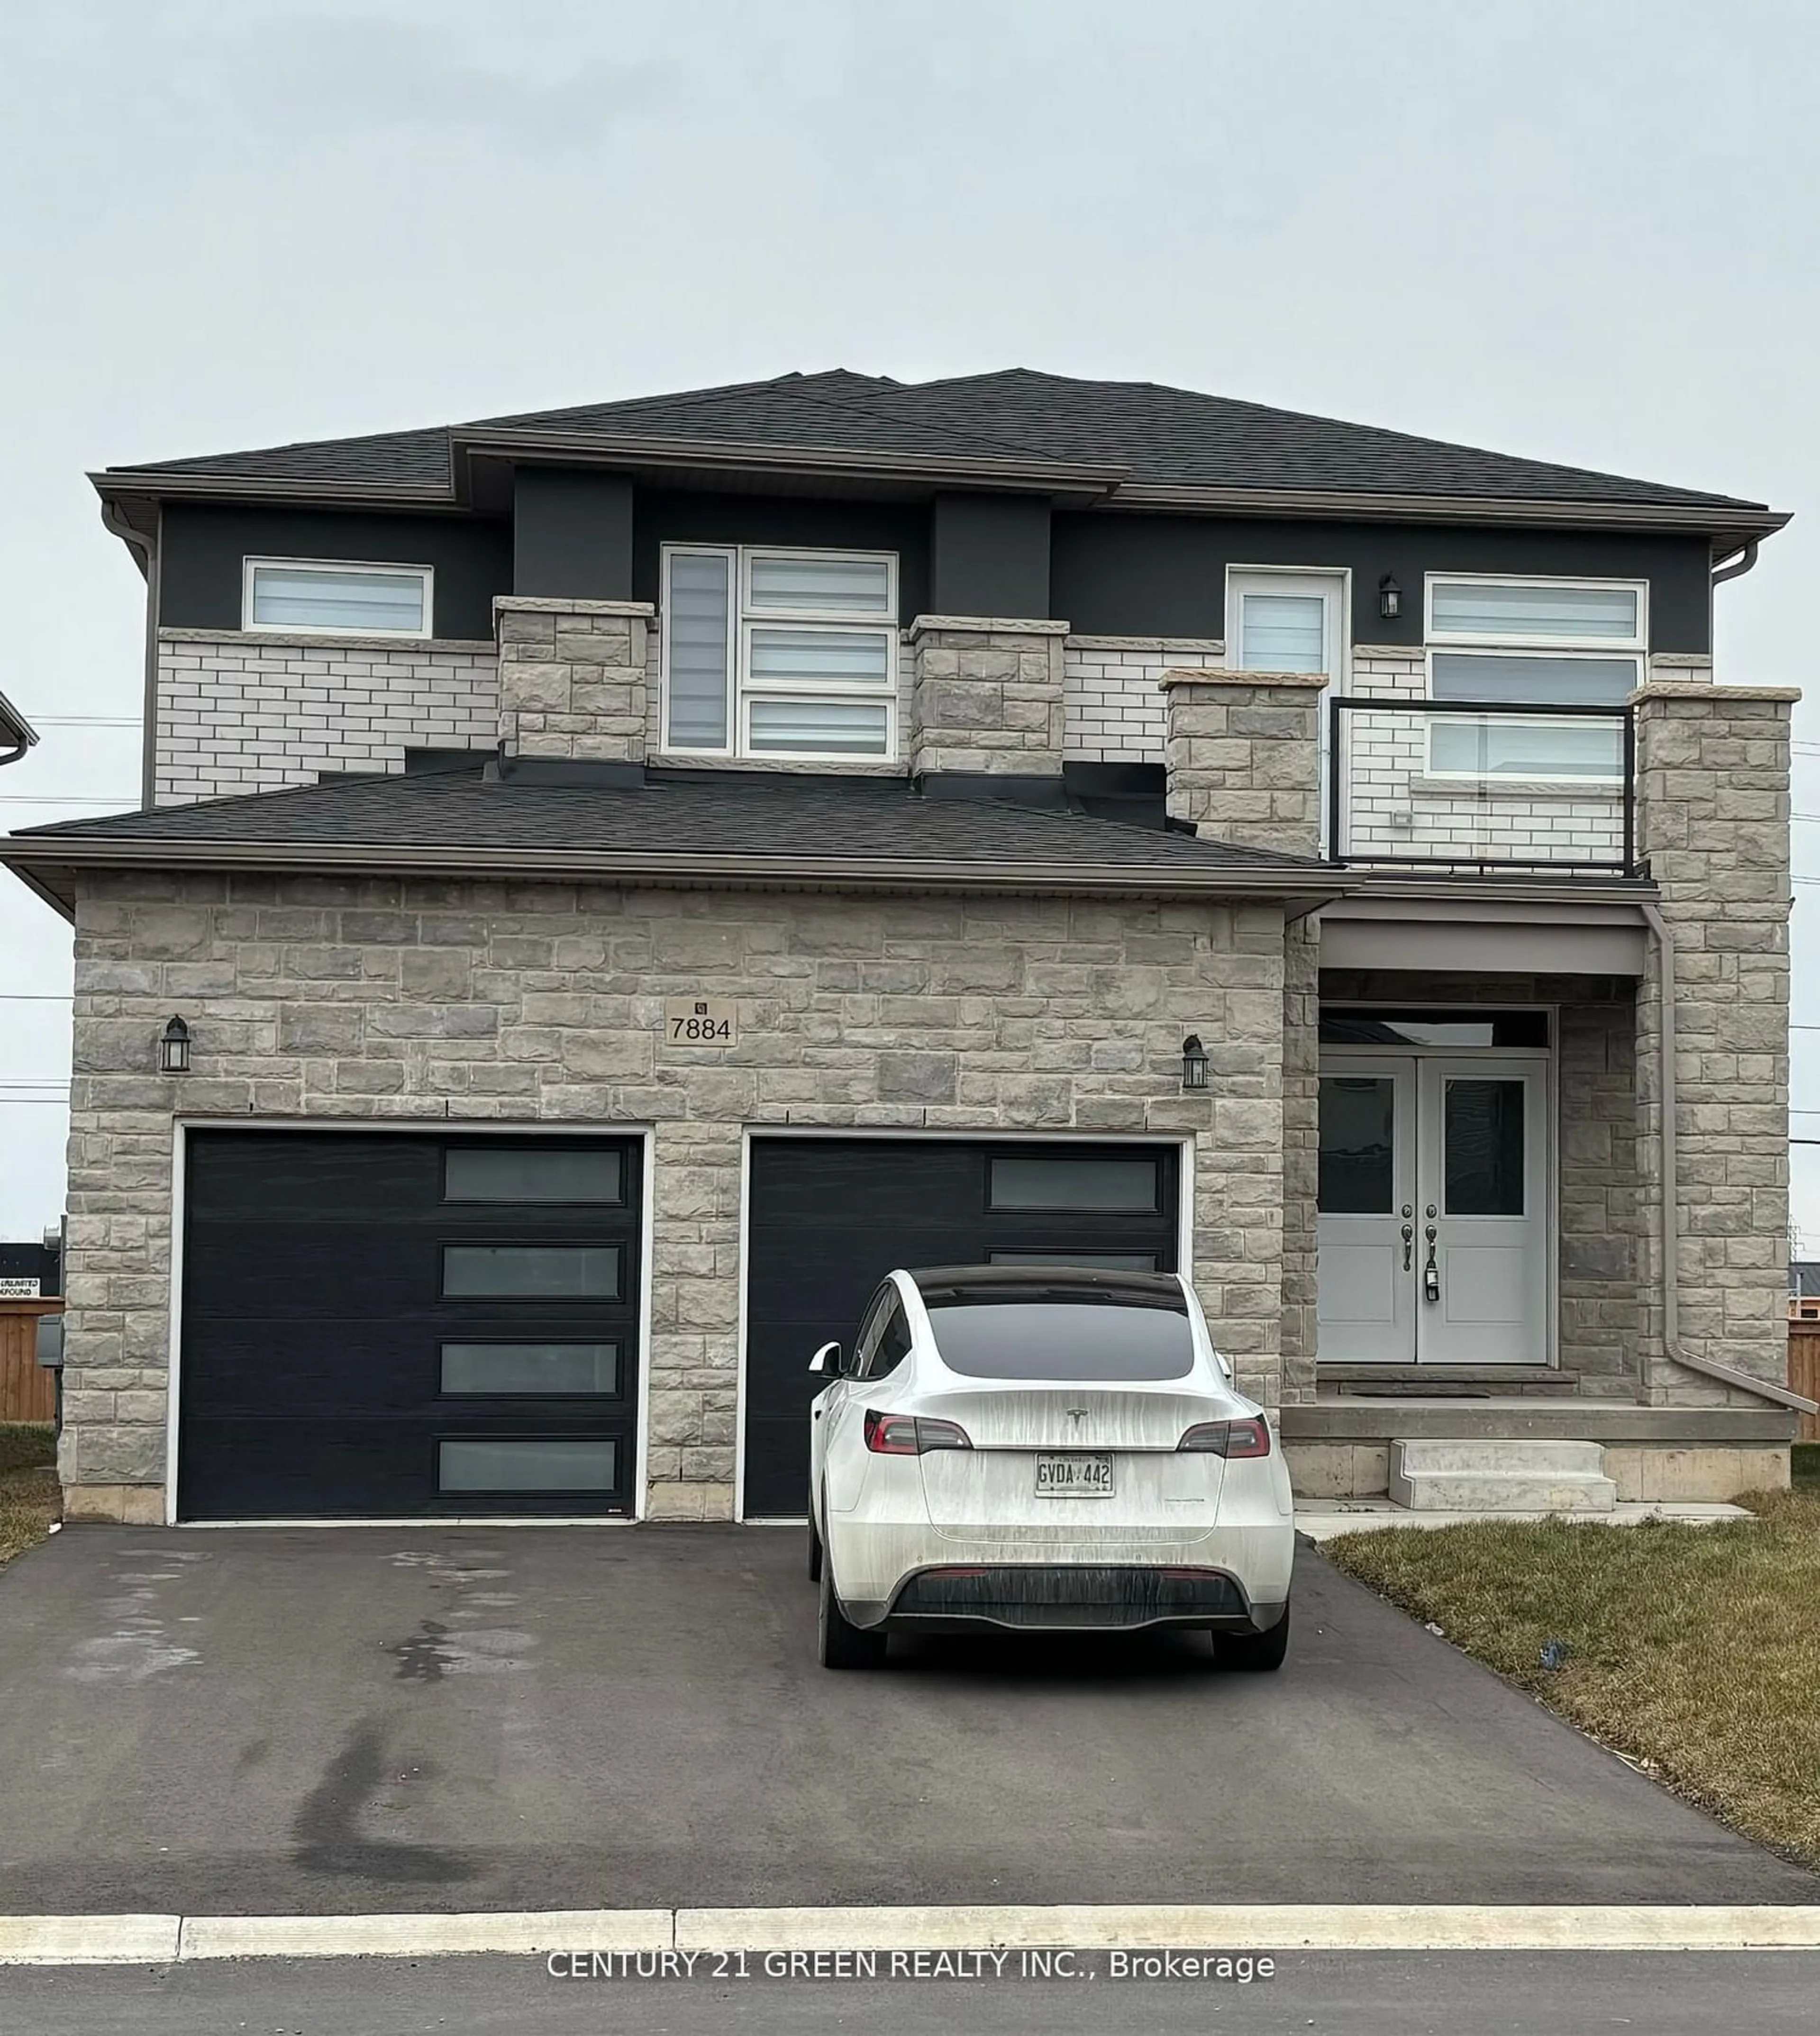 Home with brick exterior material for 7884 Seabiscuite Dr, Niagara Falls Ontario L2H 3T9